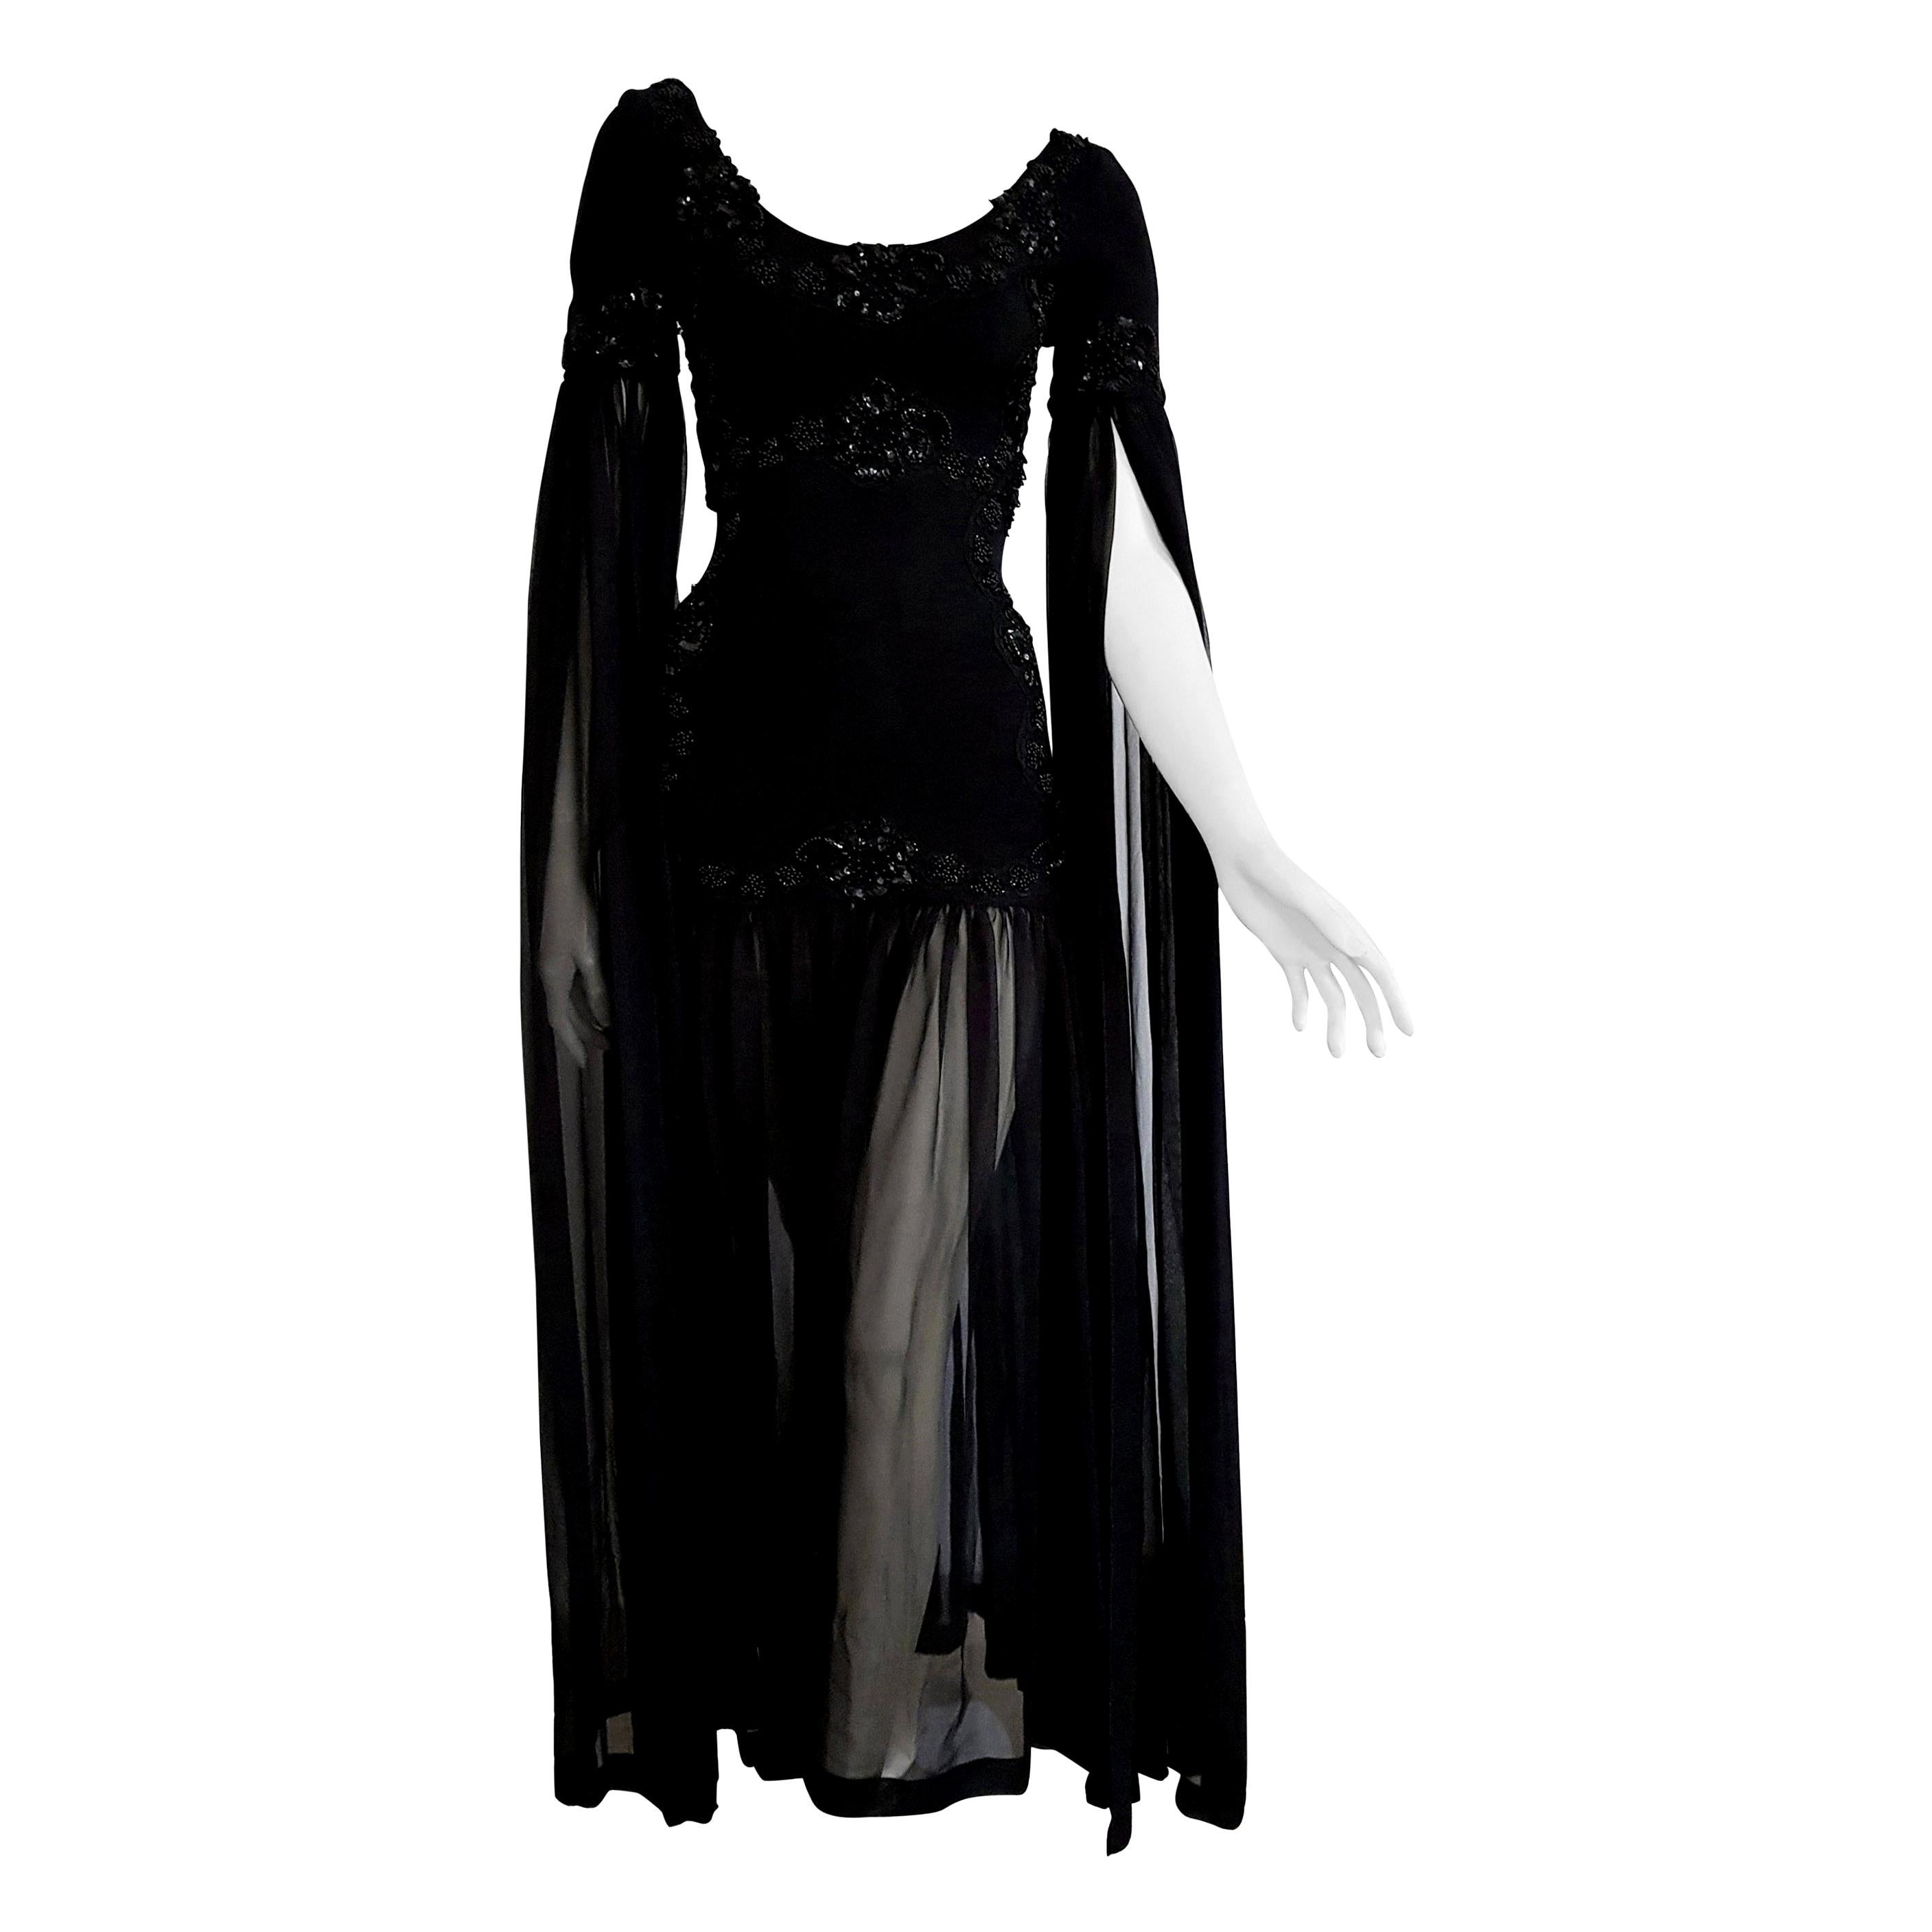 Isabelle ALLARD Paris long draped chiffon sleeves, woolen bodice, embroidered, beaded, sequins, slightly transparent chiffon skirt, wool and silk black dress. Created in the atelier of the Rue Saint Honoré Paris - Unworn, New.

Isabelle ALLARD is a